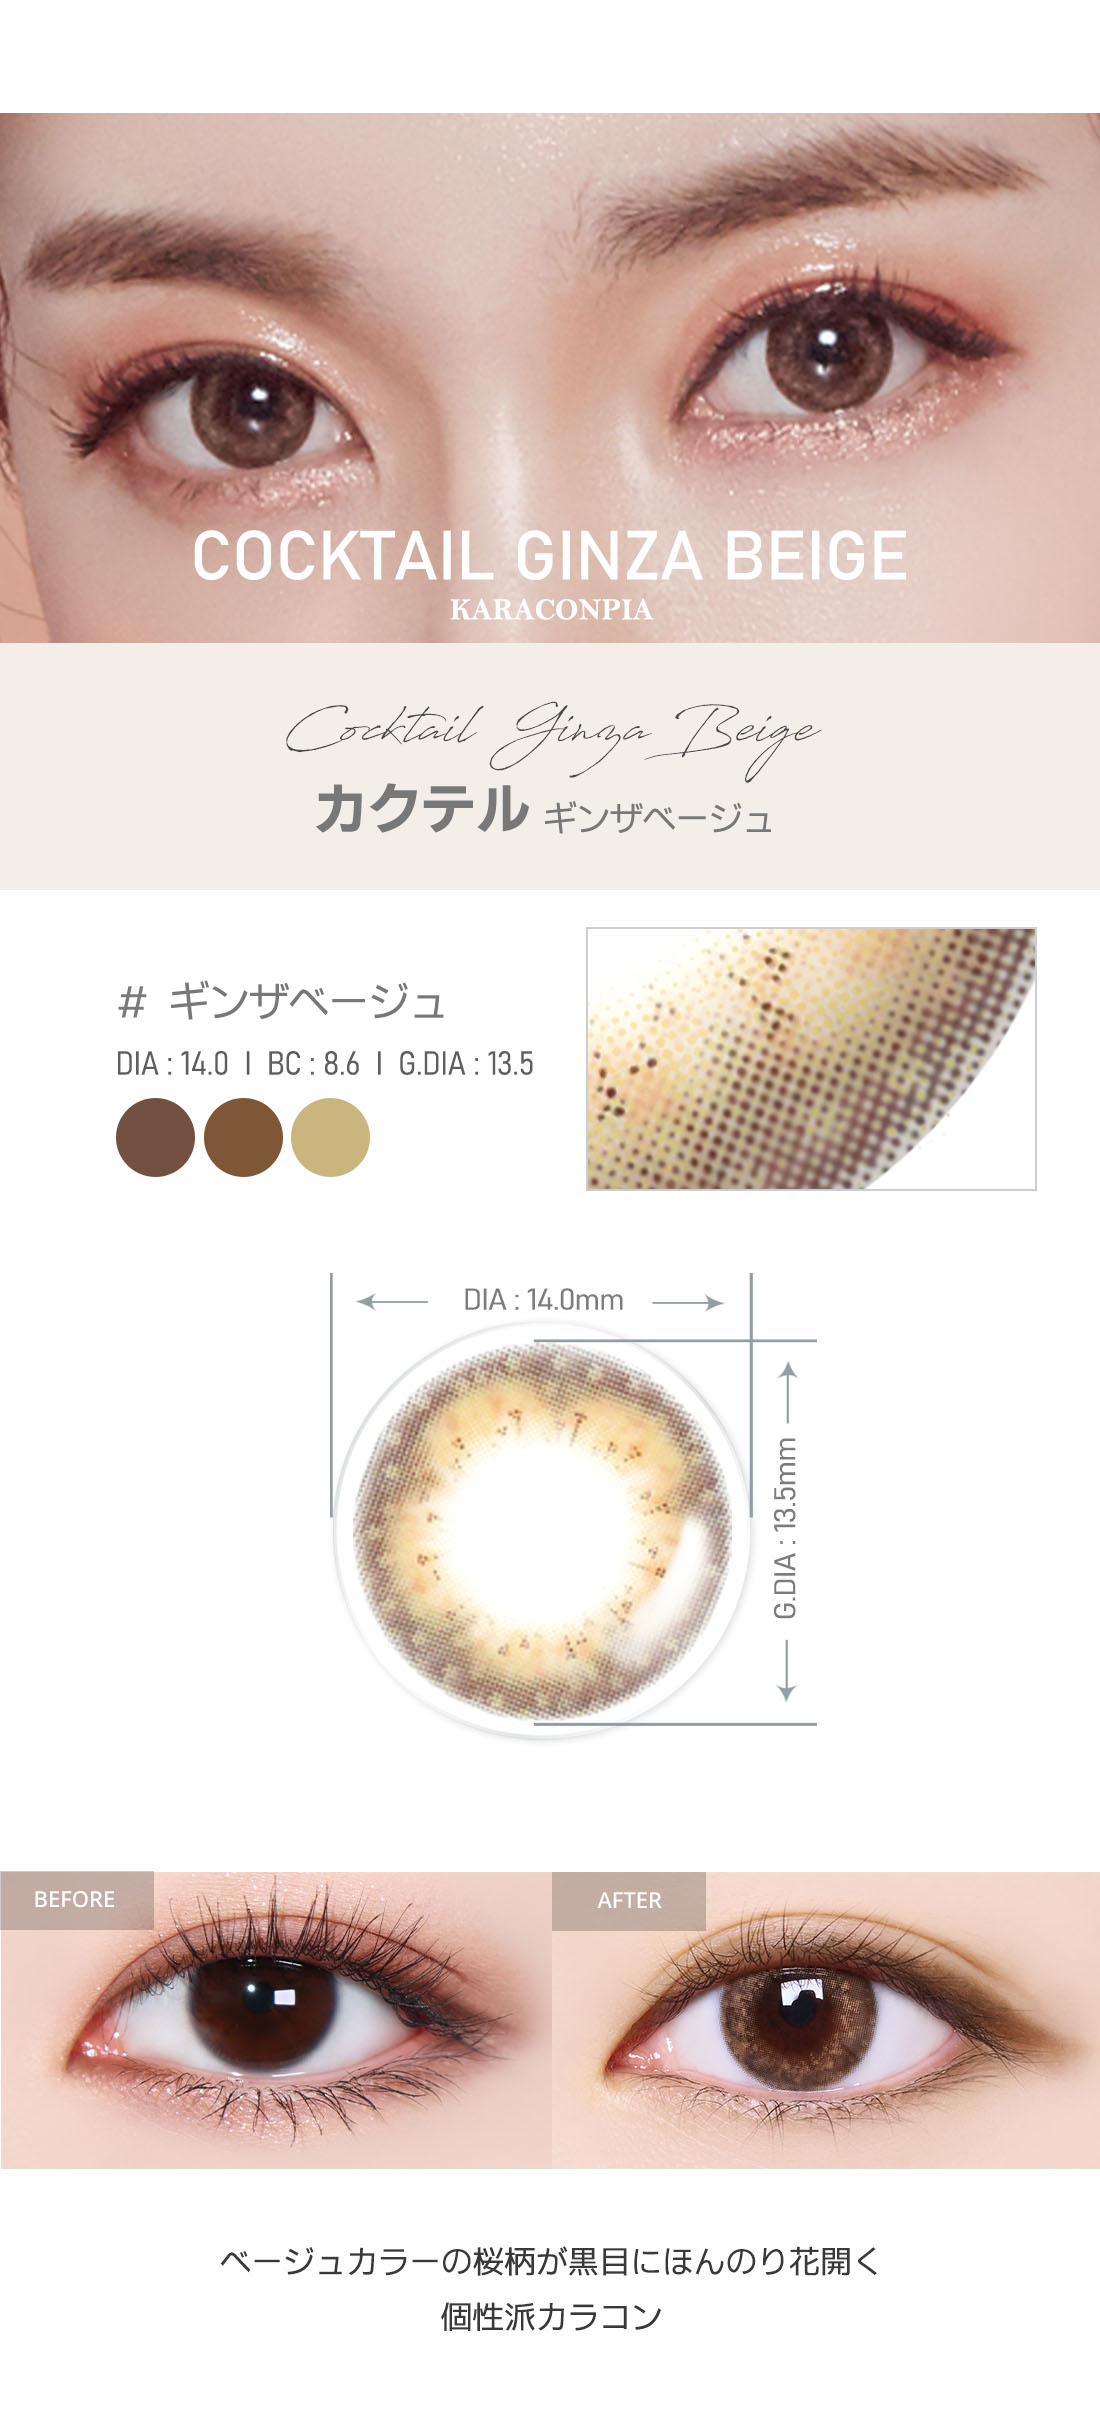 【OUTLET】カクテル・ギンザベージュ (Cocktail Ginza Beige) / 使用期限 : 2023年 12月まで